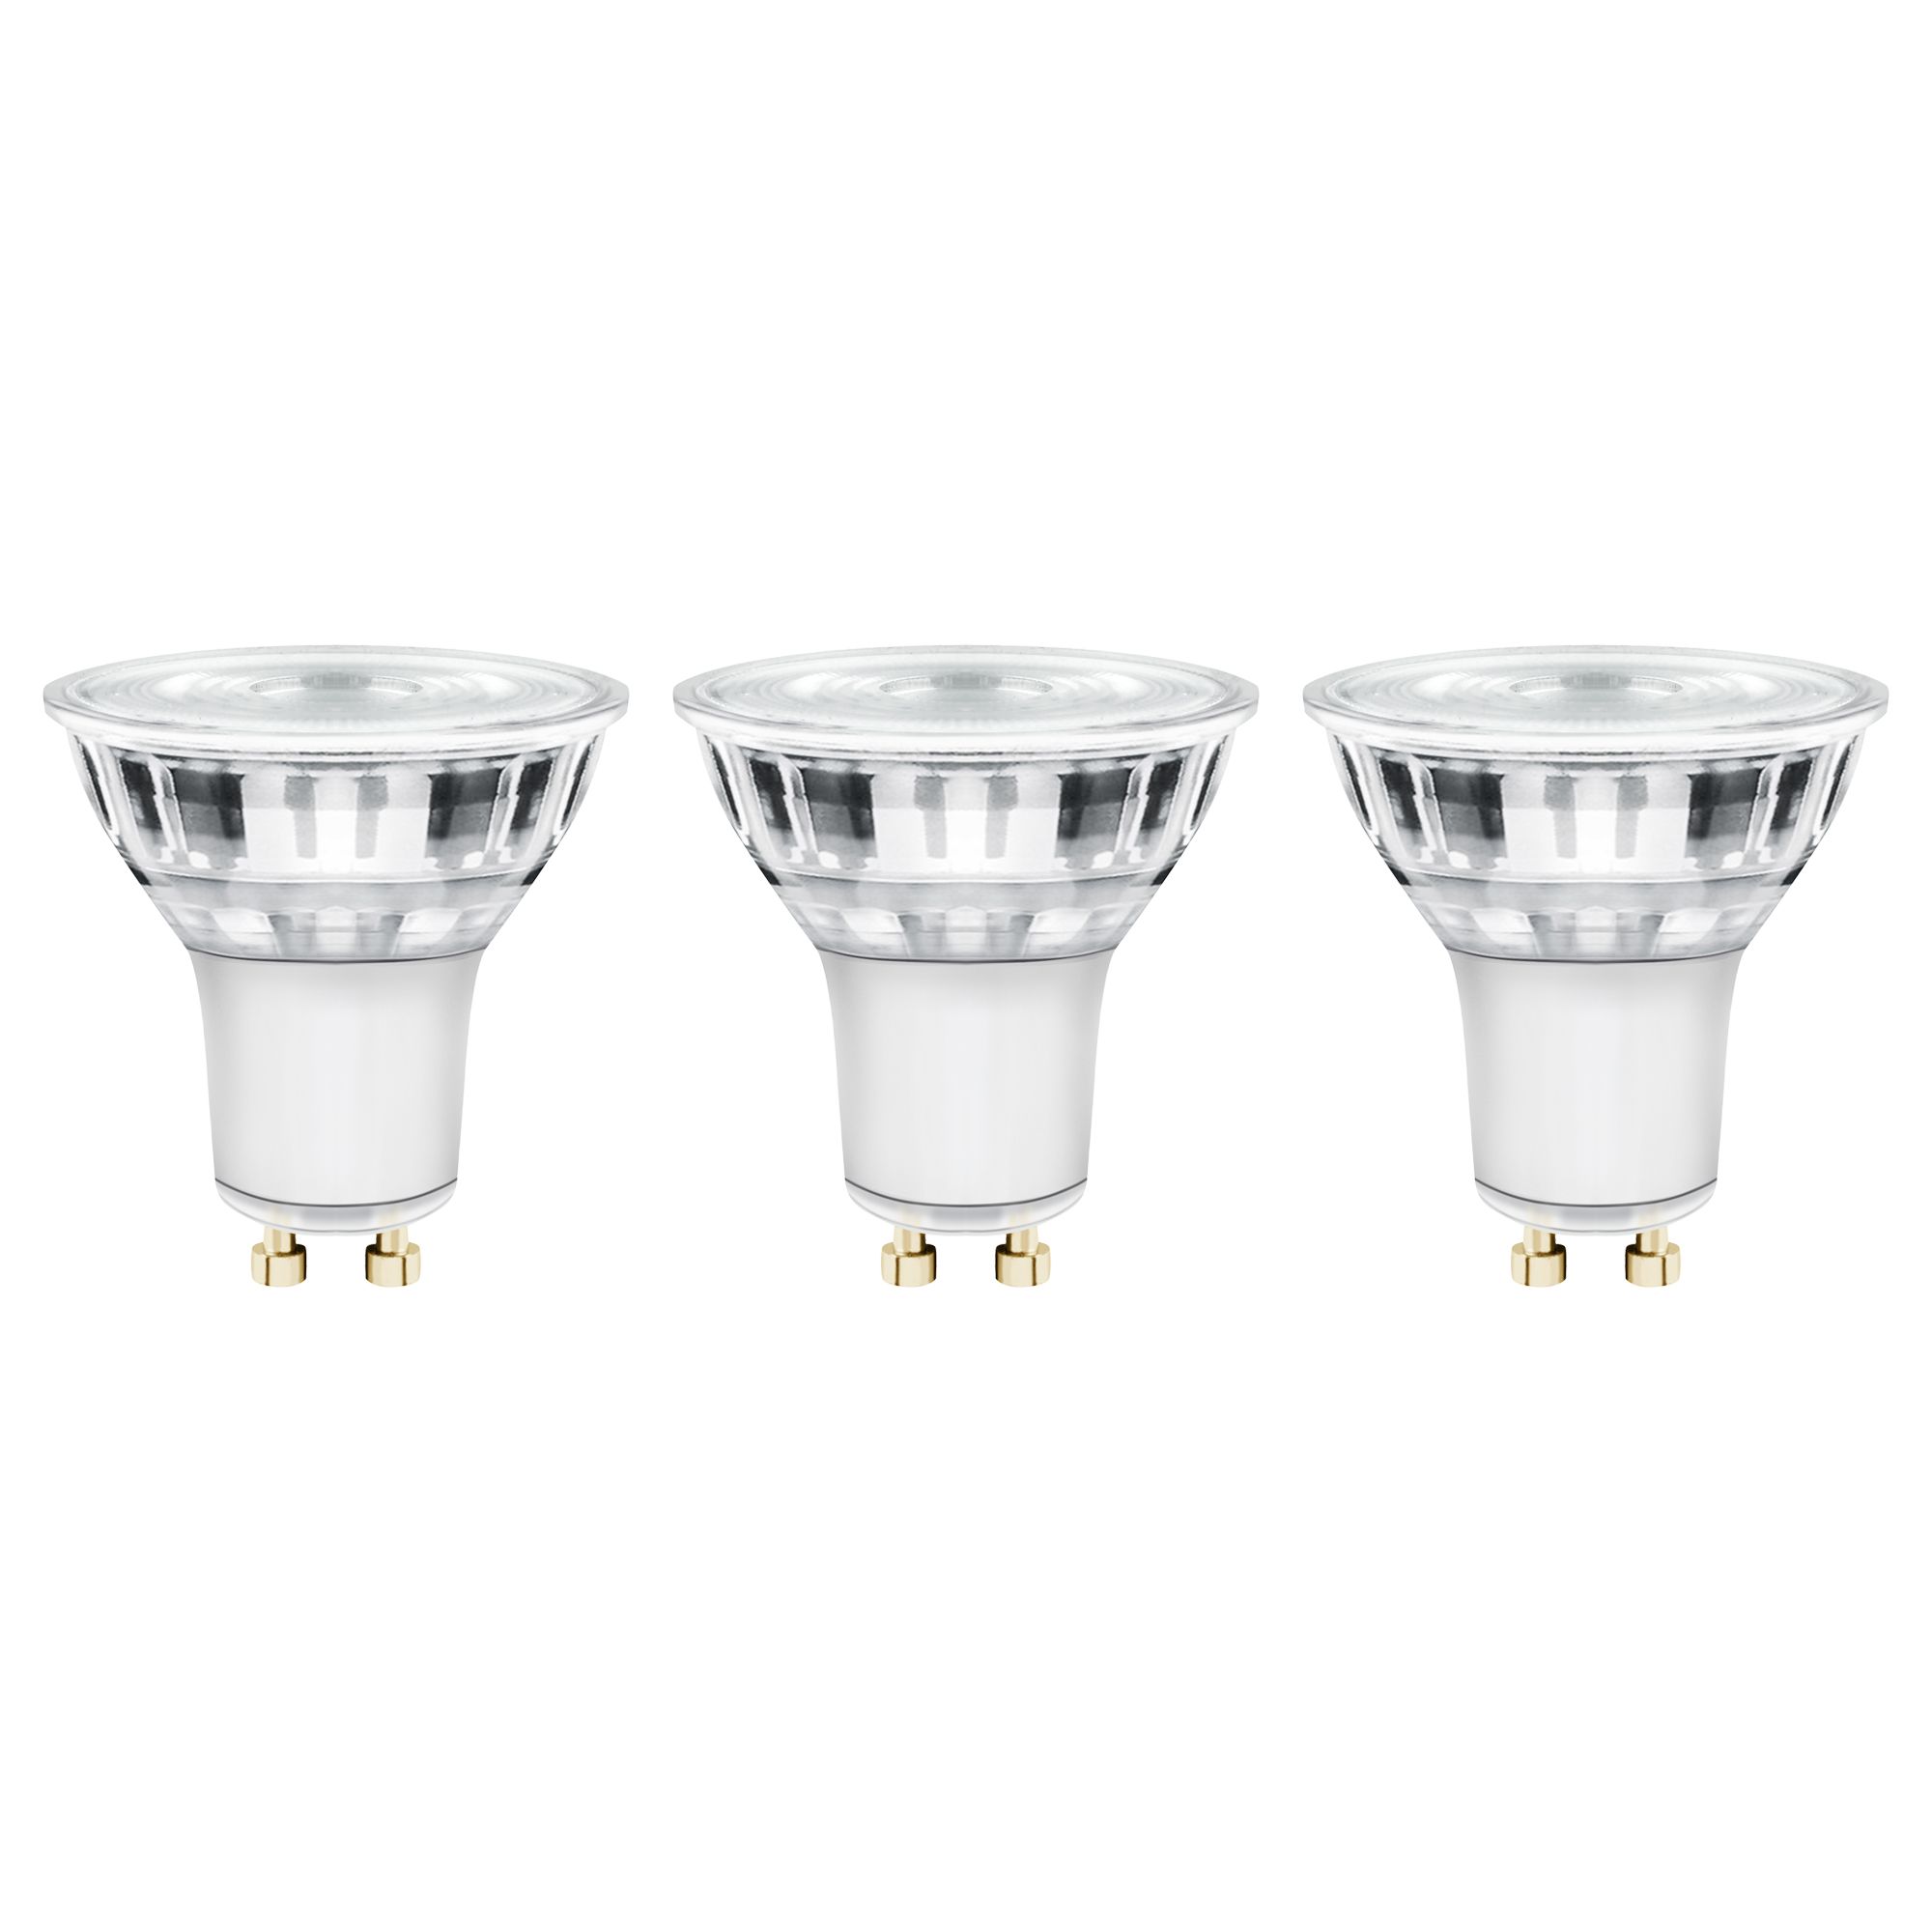 LED Diall bulb, GU10 3 white DIY at Dimmable 345lm Warm B&Q Pack of | Light Reflector 4.5W